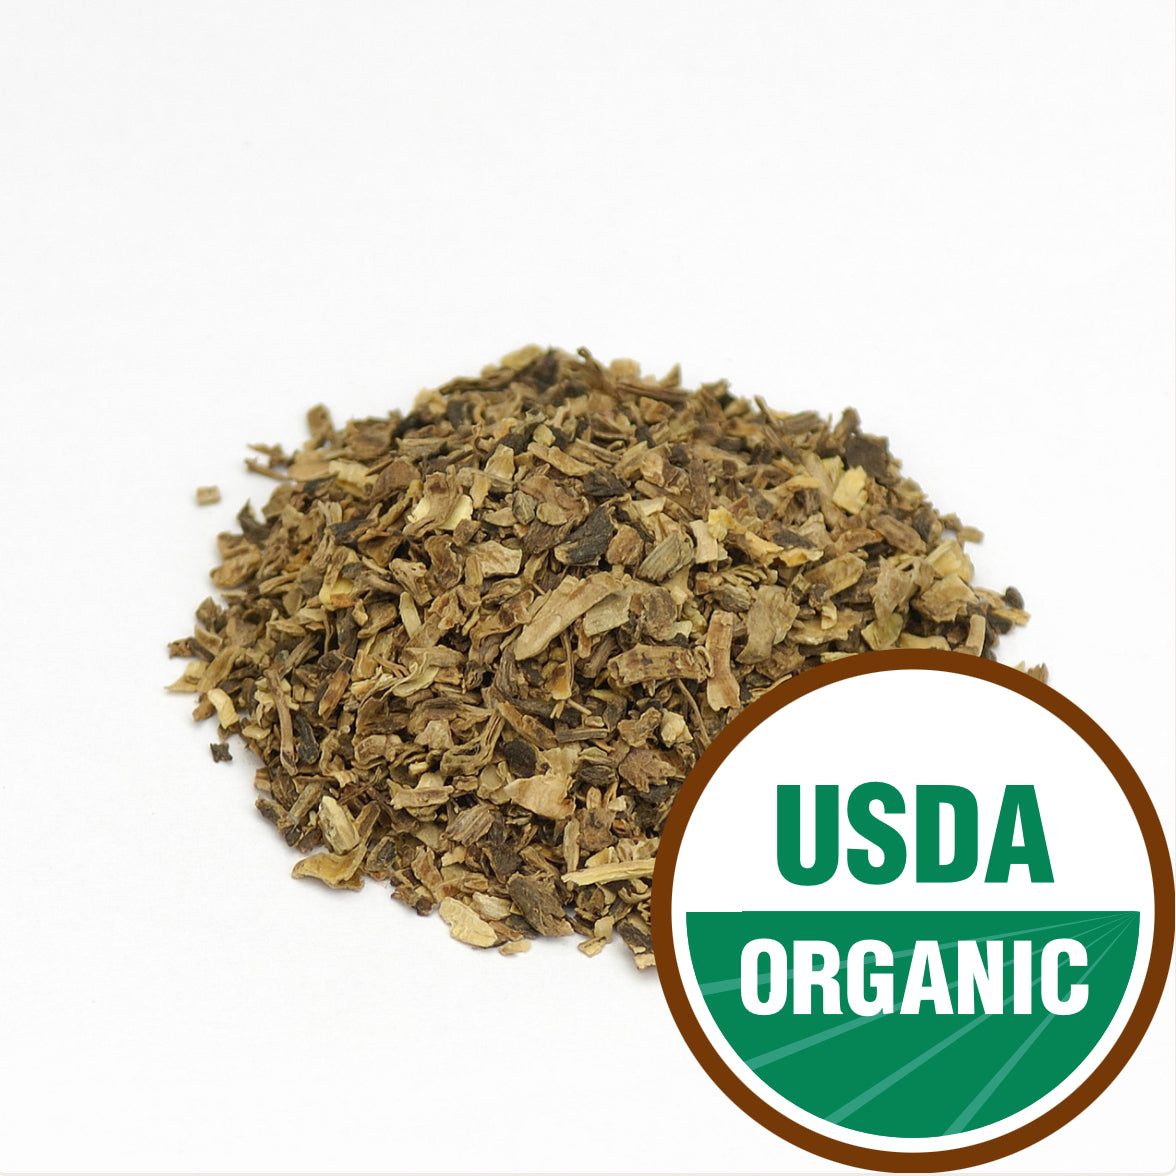 ORGANIC BLACK COHOSH CRUSHED AND SIFTED HERB